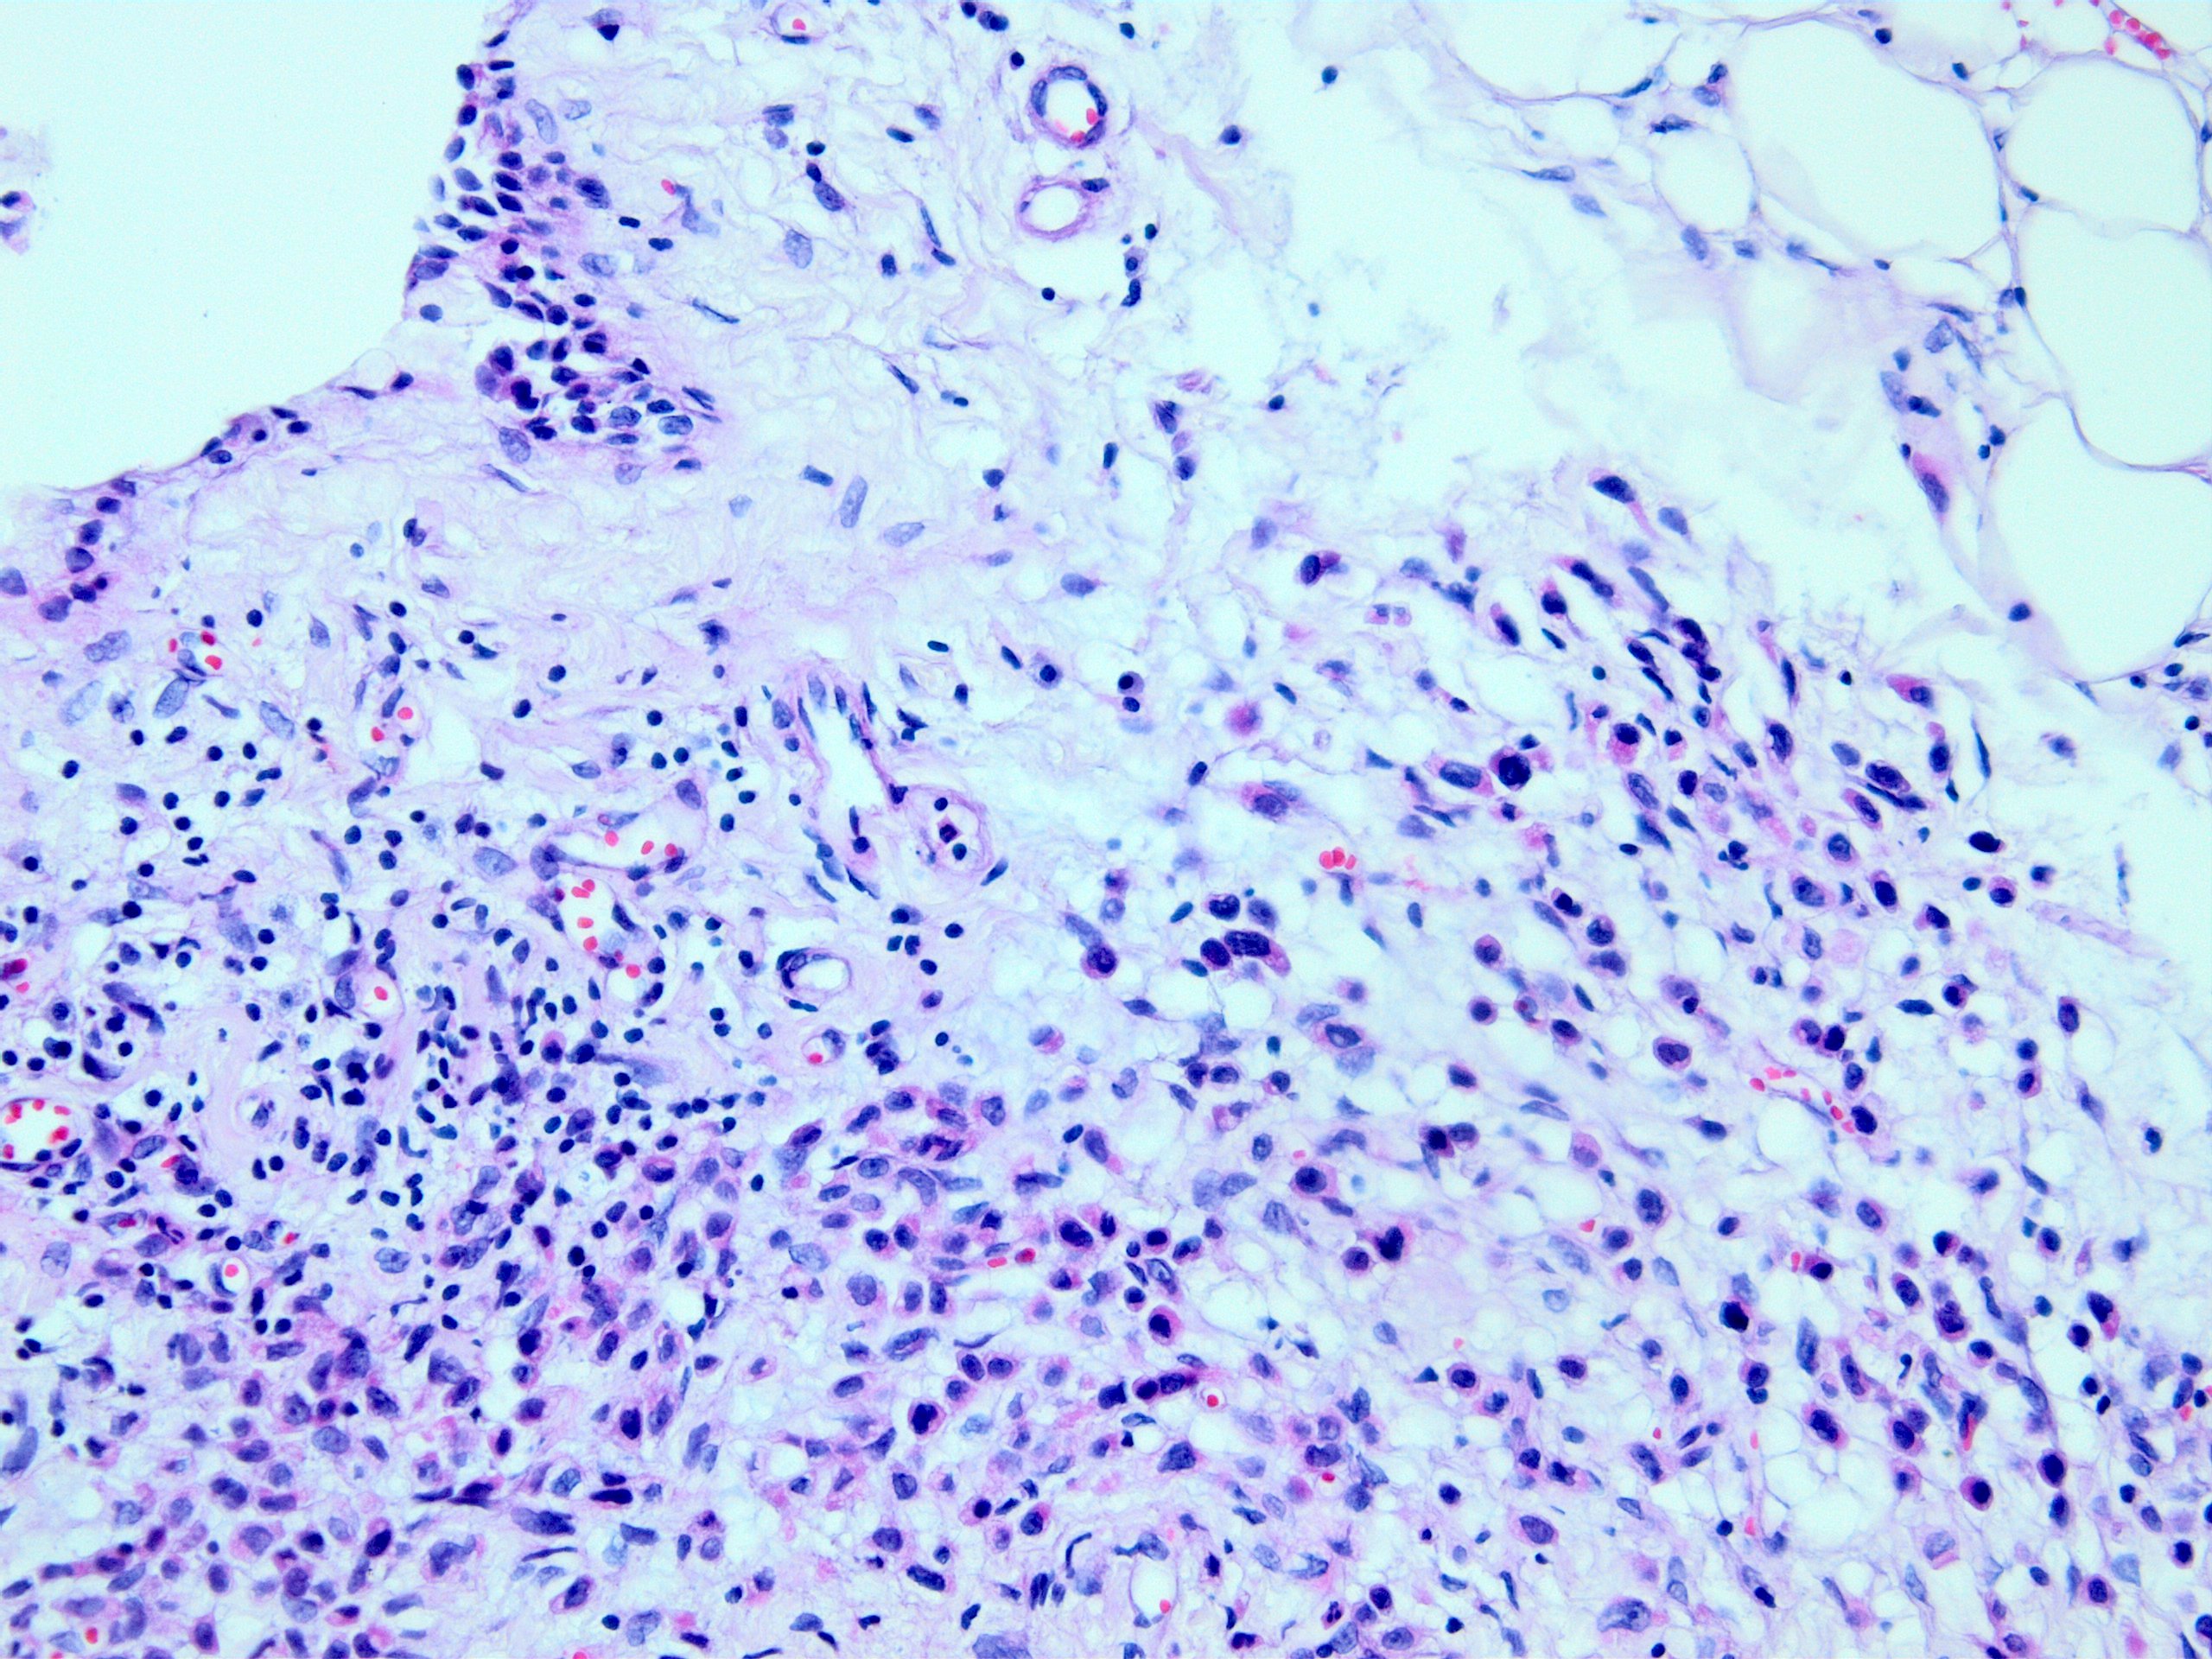 Signet ring carcinoma infiltrating omentum